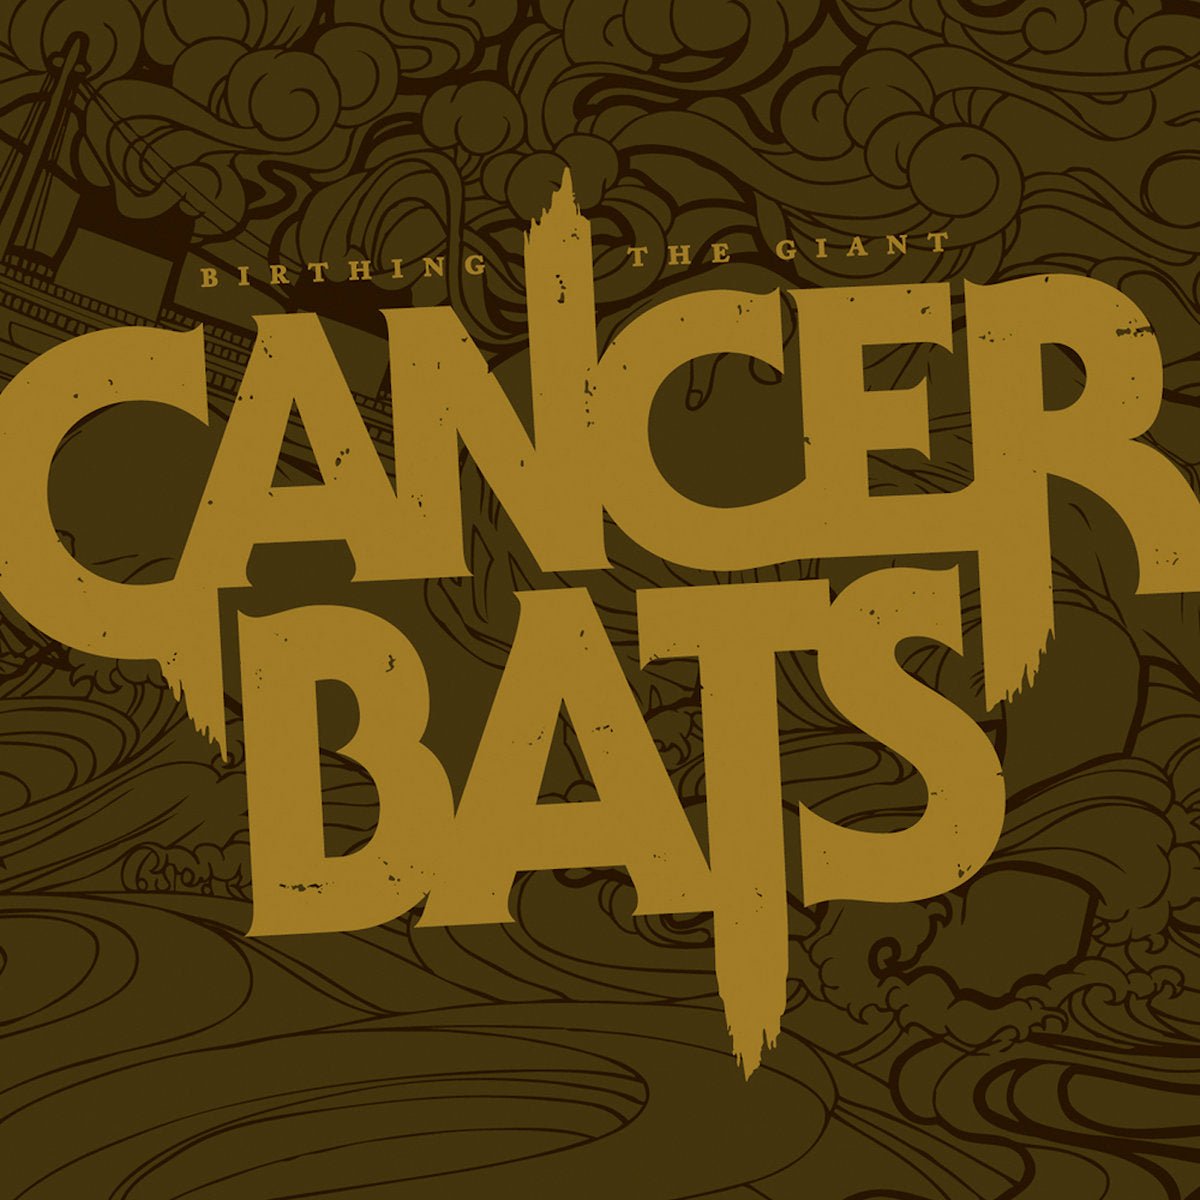 Cancer Bats - Birthing The Giant LP - Vinyl - Hassle